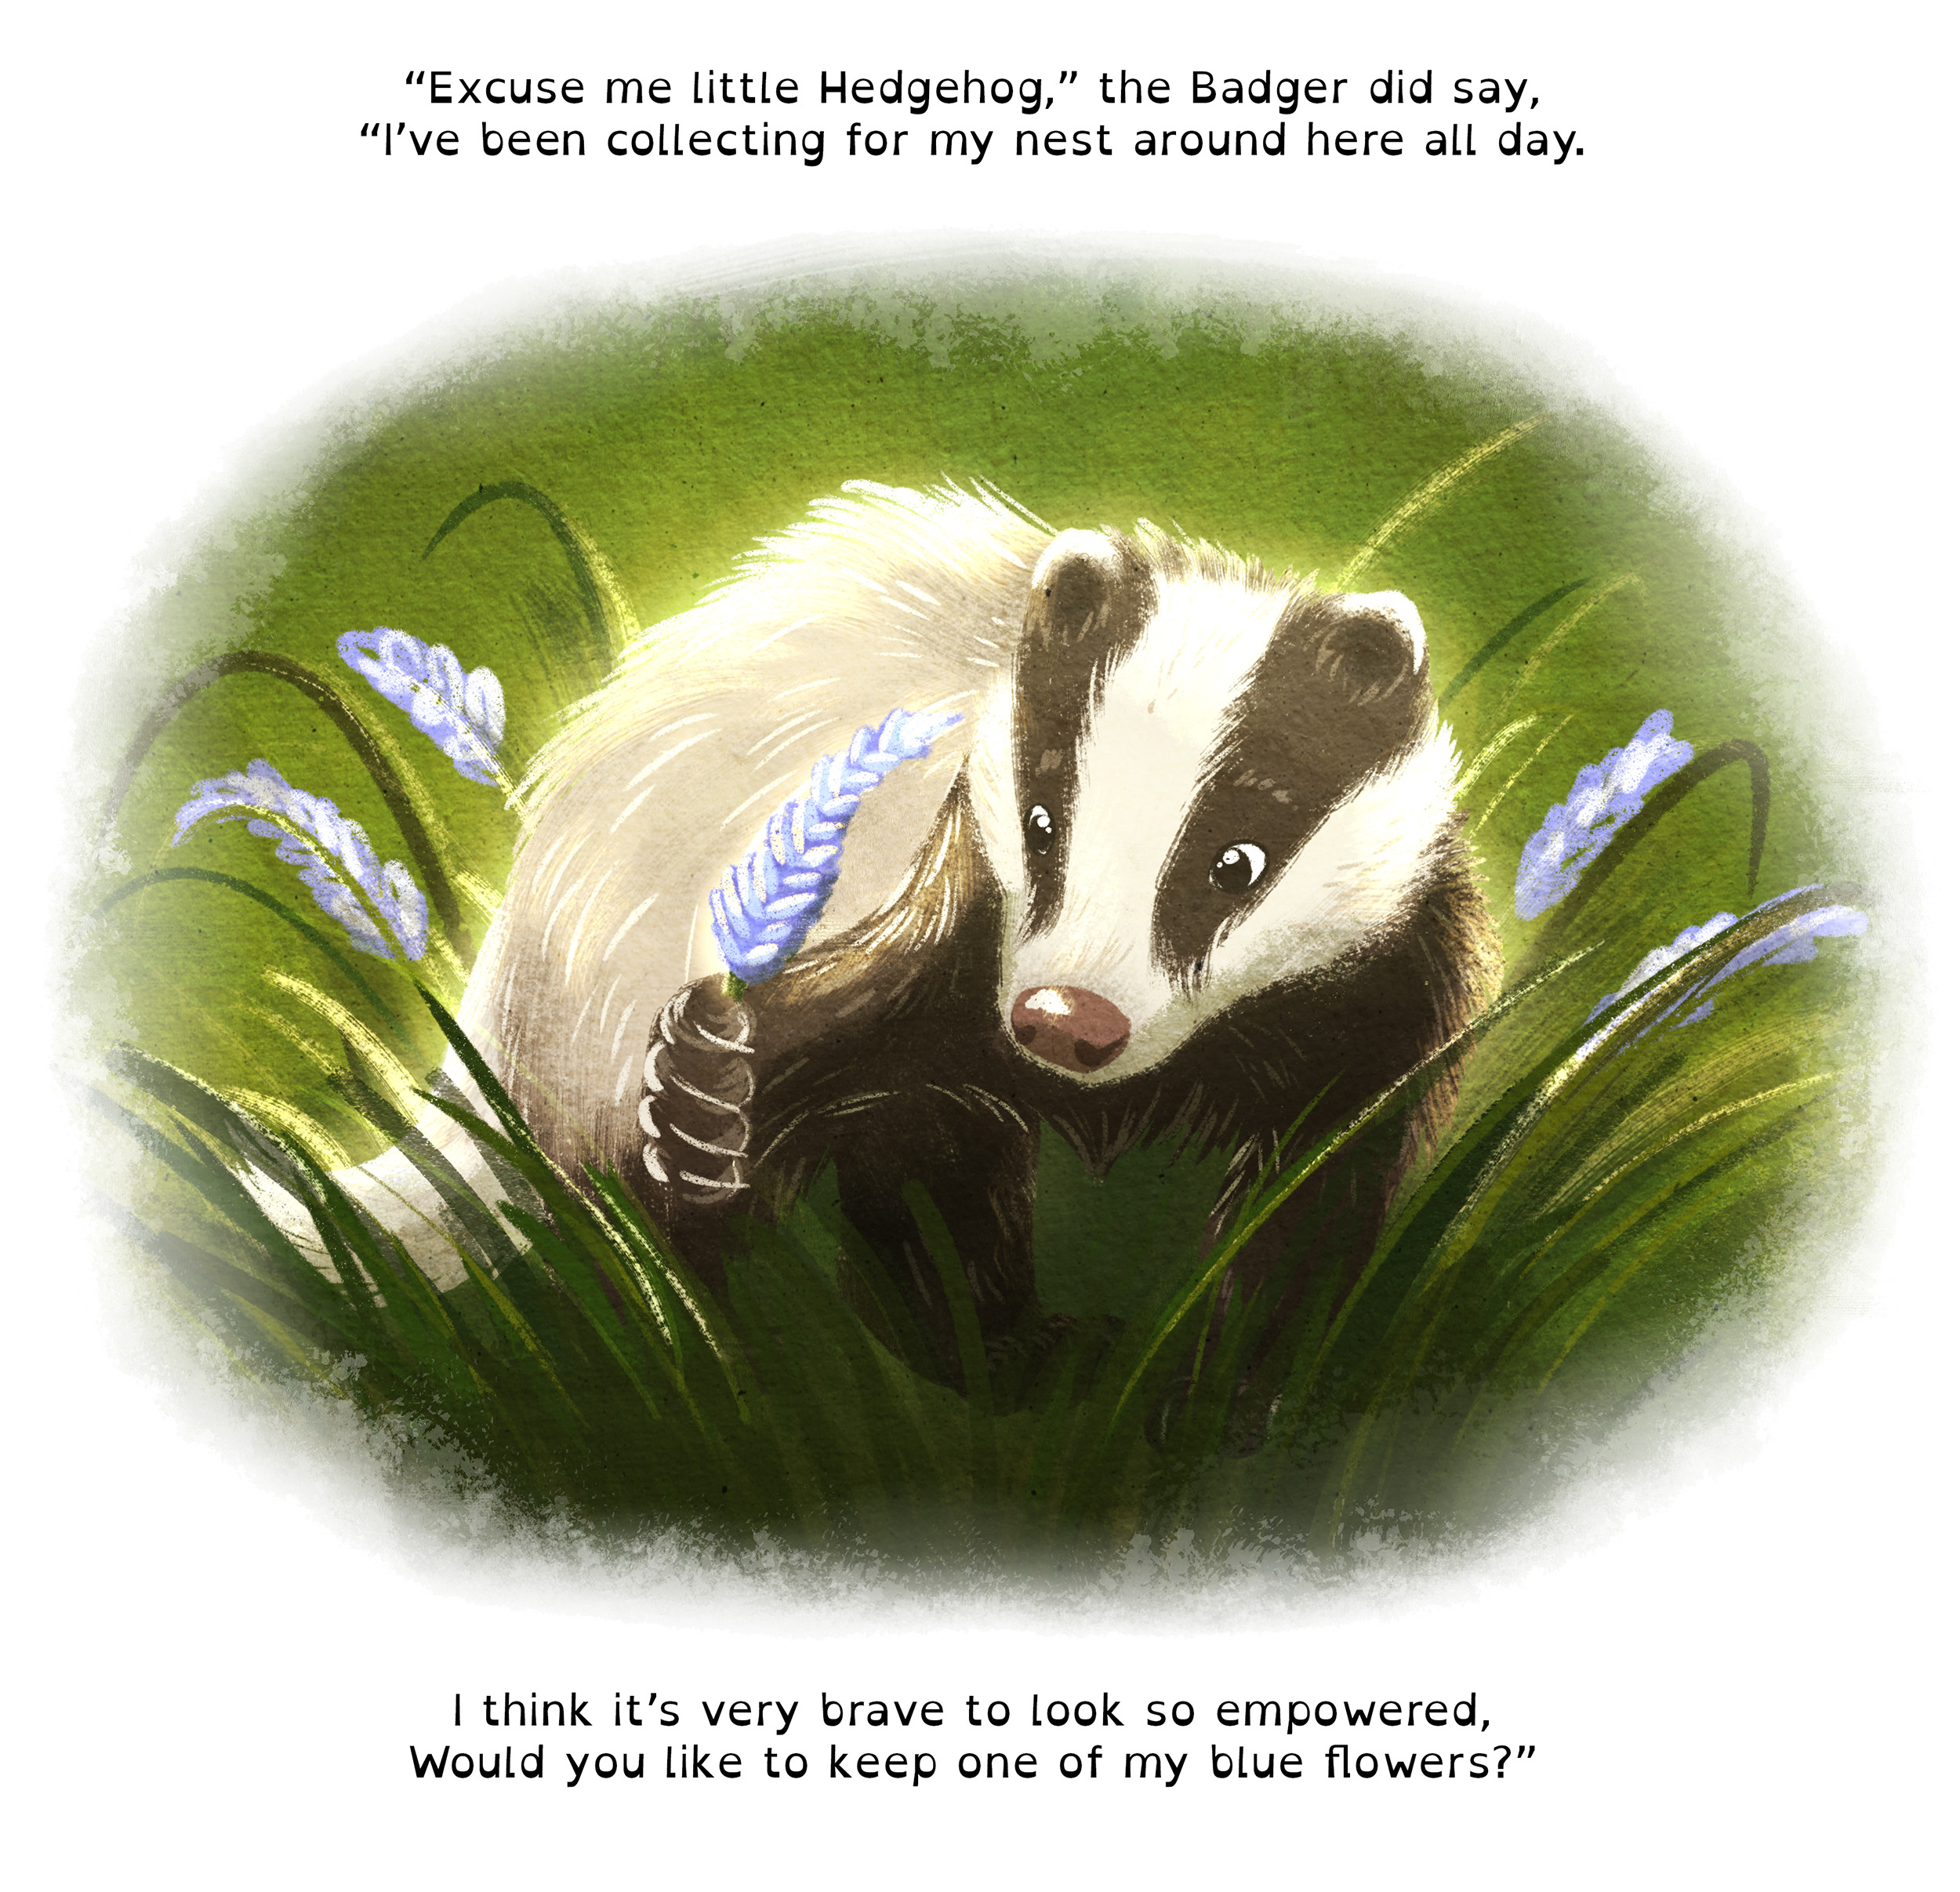 Page of What the Forest Has in Store by G. A. McAndrew, showing a badger amongst long grass and blue flowers